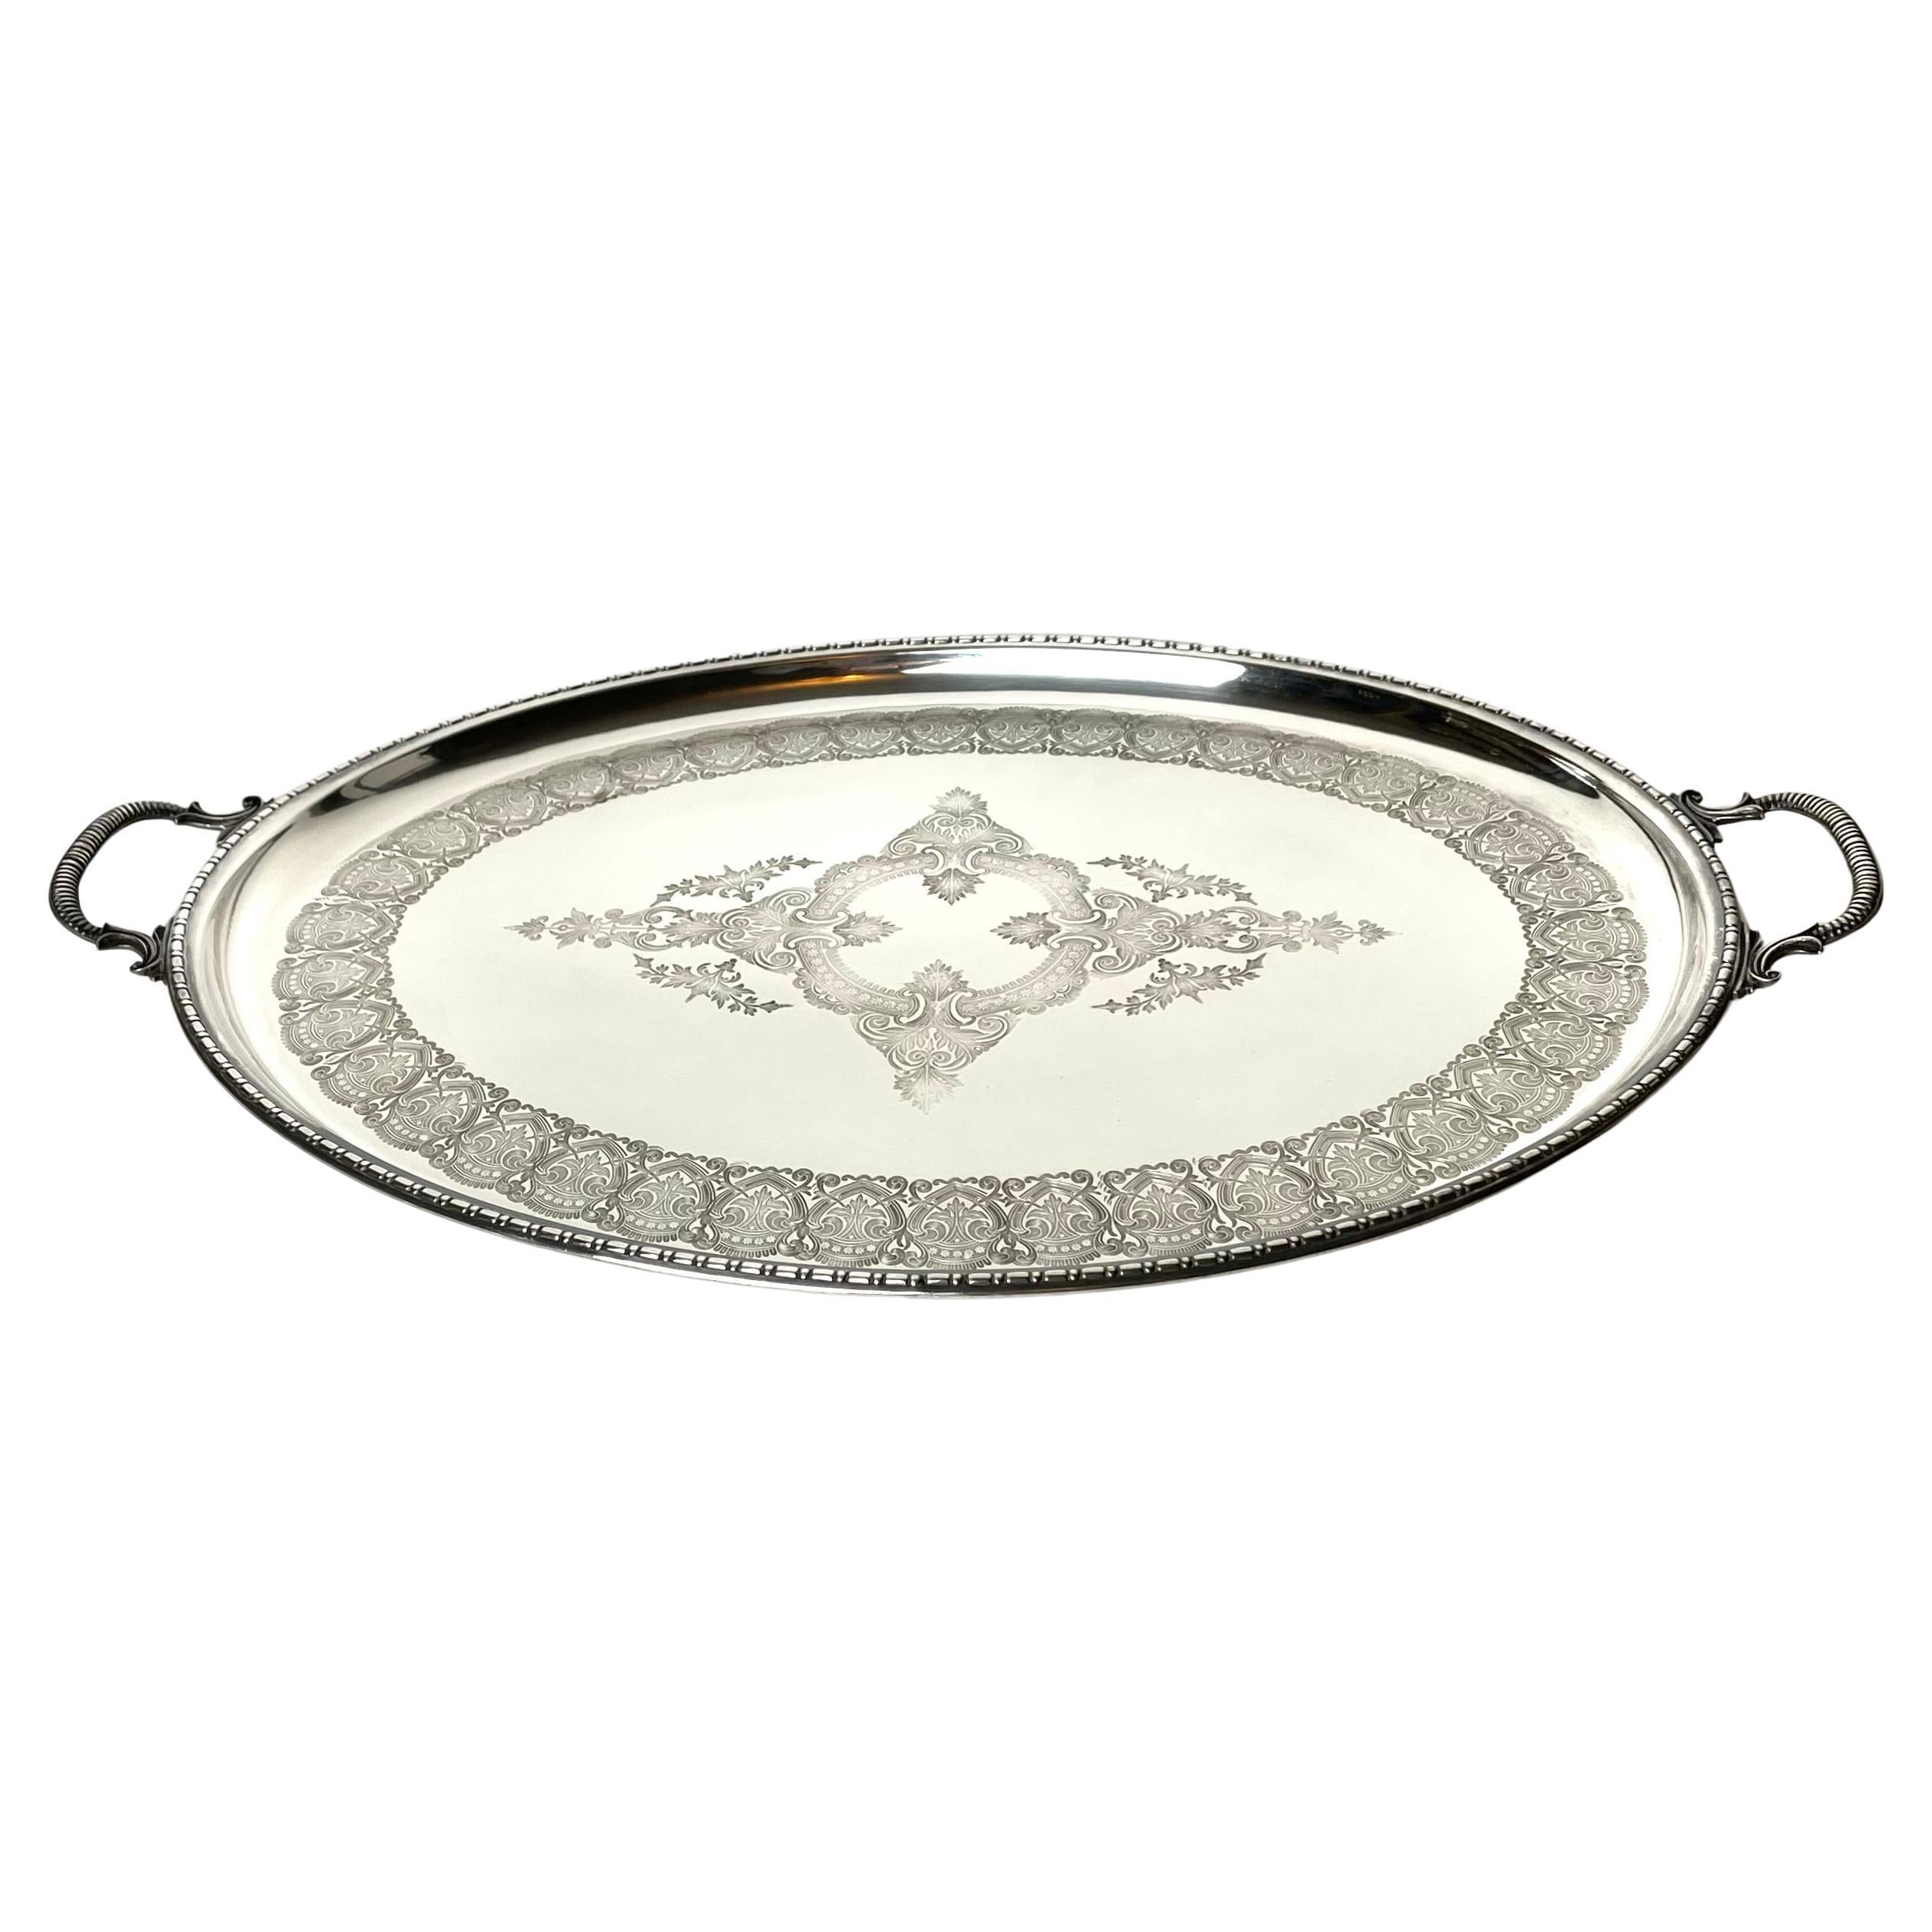 Elegant Silver-Plated Tray from the late 19th Century. Beautiful decor and with two elegant handles. Probably made in Sweden during the 1870s-1880s.



Wear consistent with age and use 